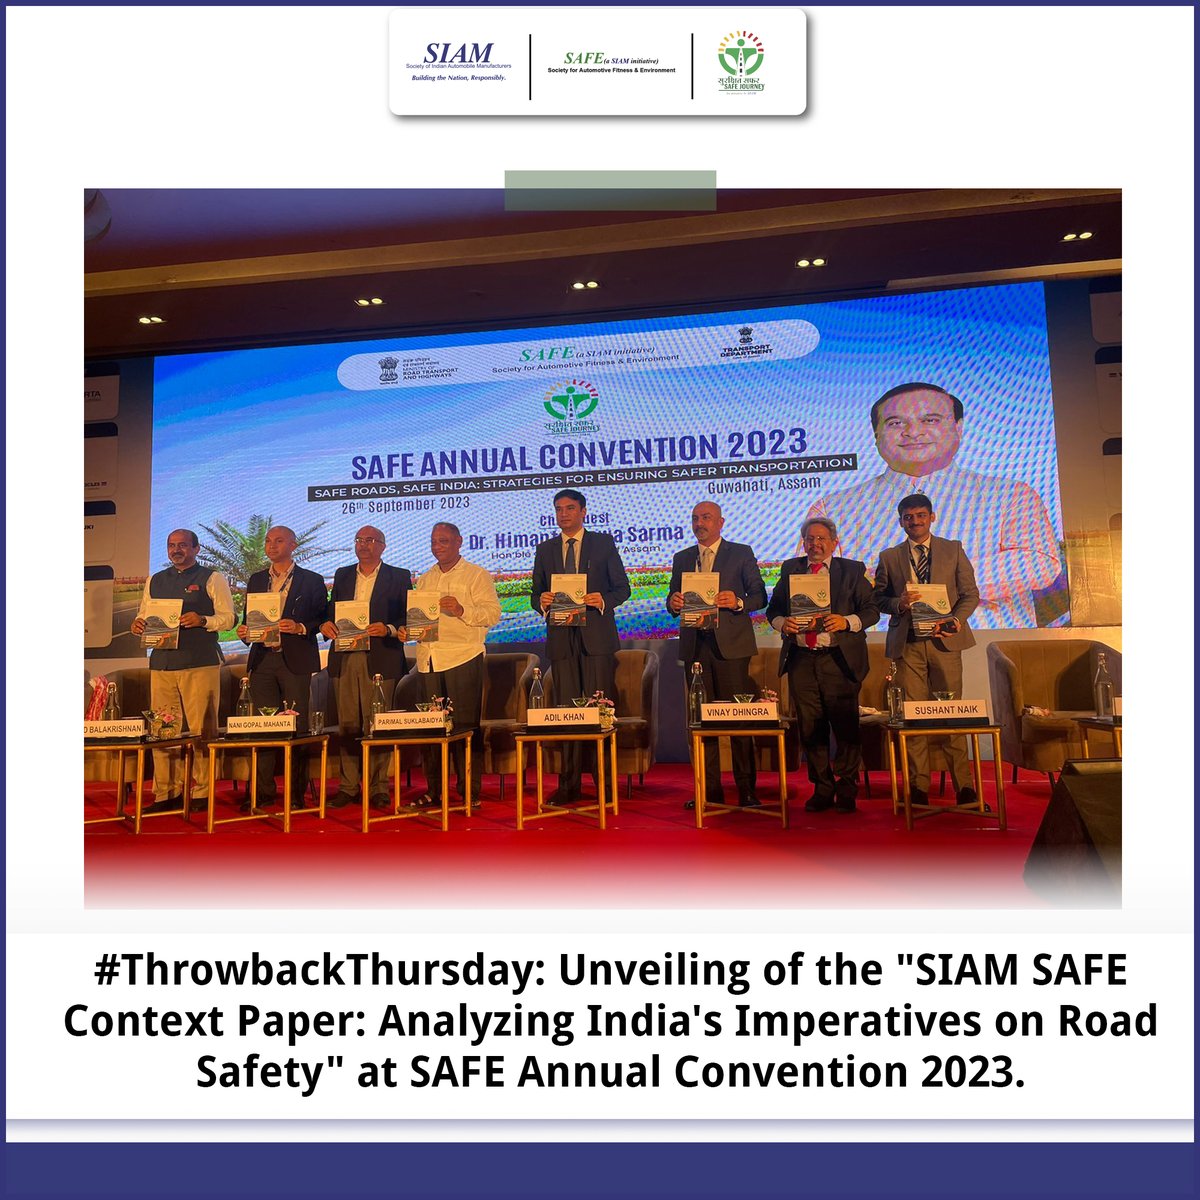 Flashback to the esteemed dignitaries who unveiled the 'SIAM SAFE Context Paper: Analyzing India's Imperatives on Road Safety' at the inaugural session of the SAFE Annual Convention 2023. #SIAM #BTNR #SustainableMobility #SurakshitSafar_SIAM #सुरक्षितसफर_SIAM #SAFEAC23 #BTNR…